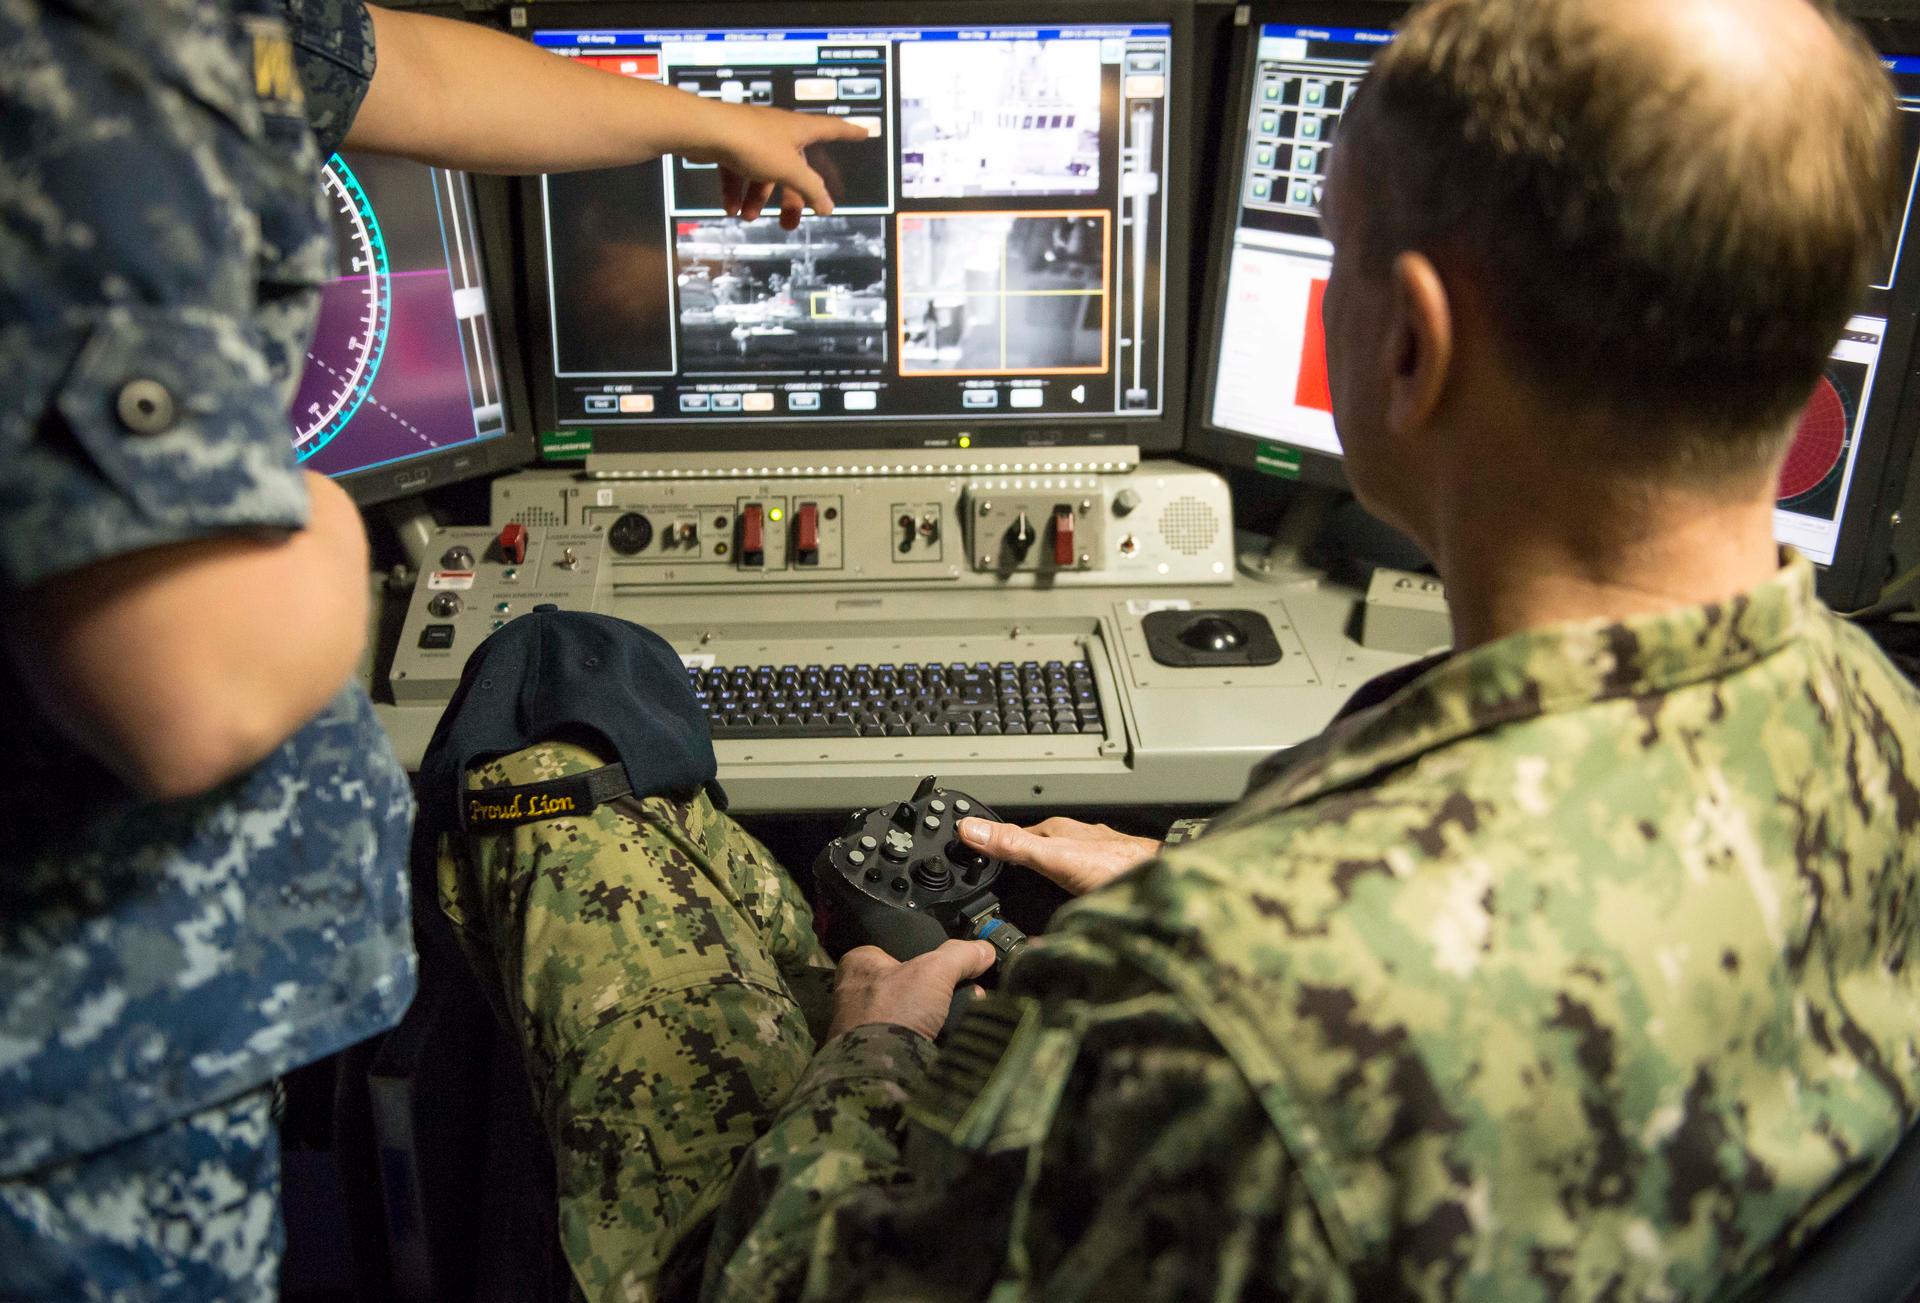 At the controls of the Navy's new laser weapon, aboard the USS Ponce.